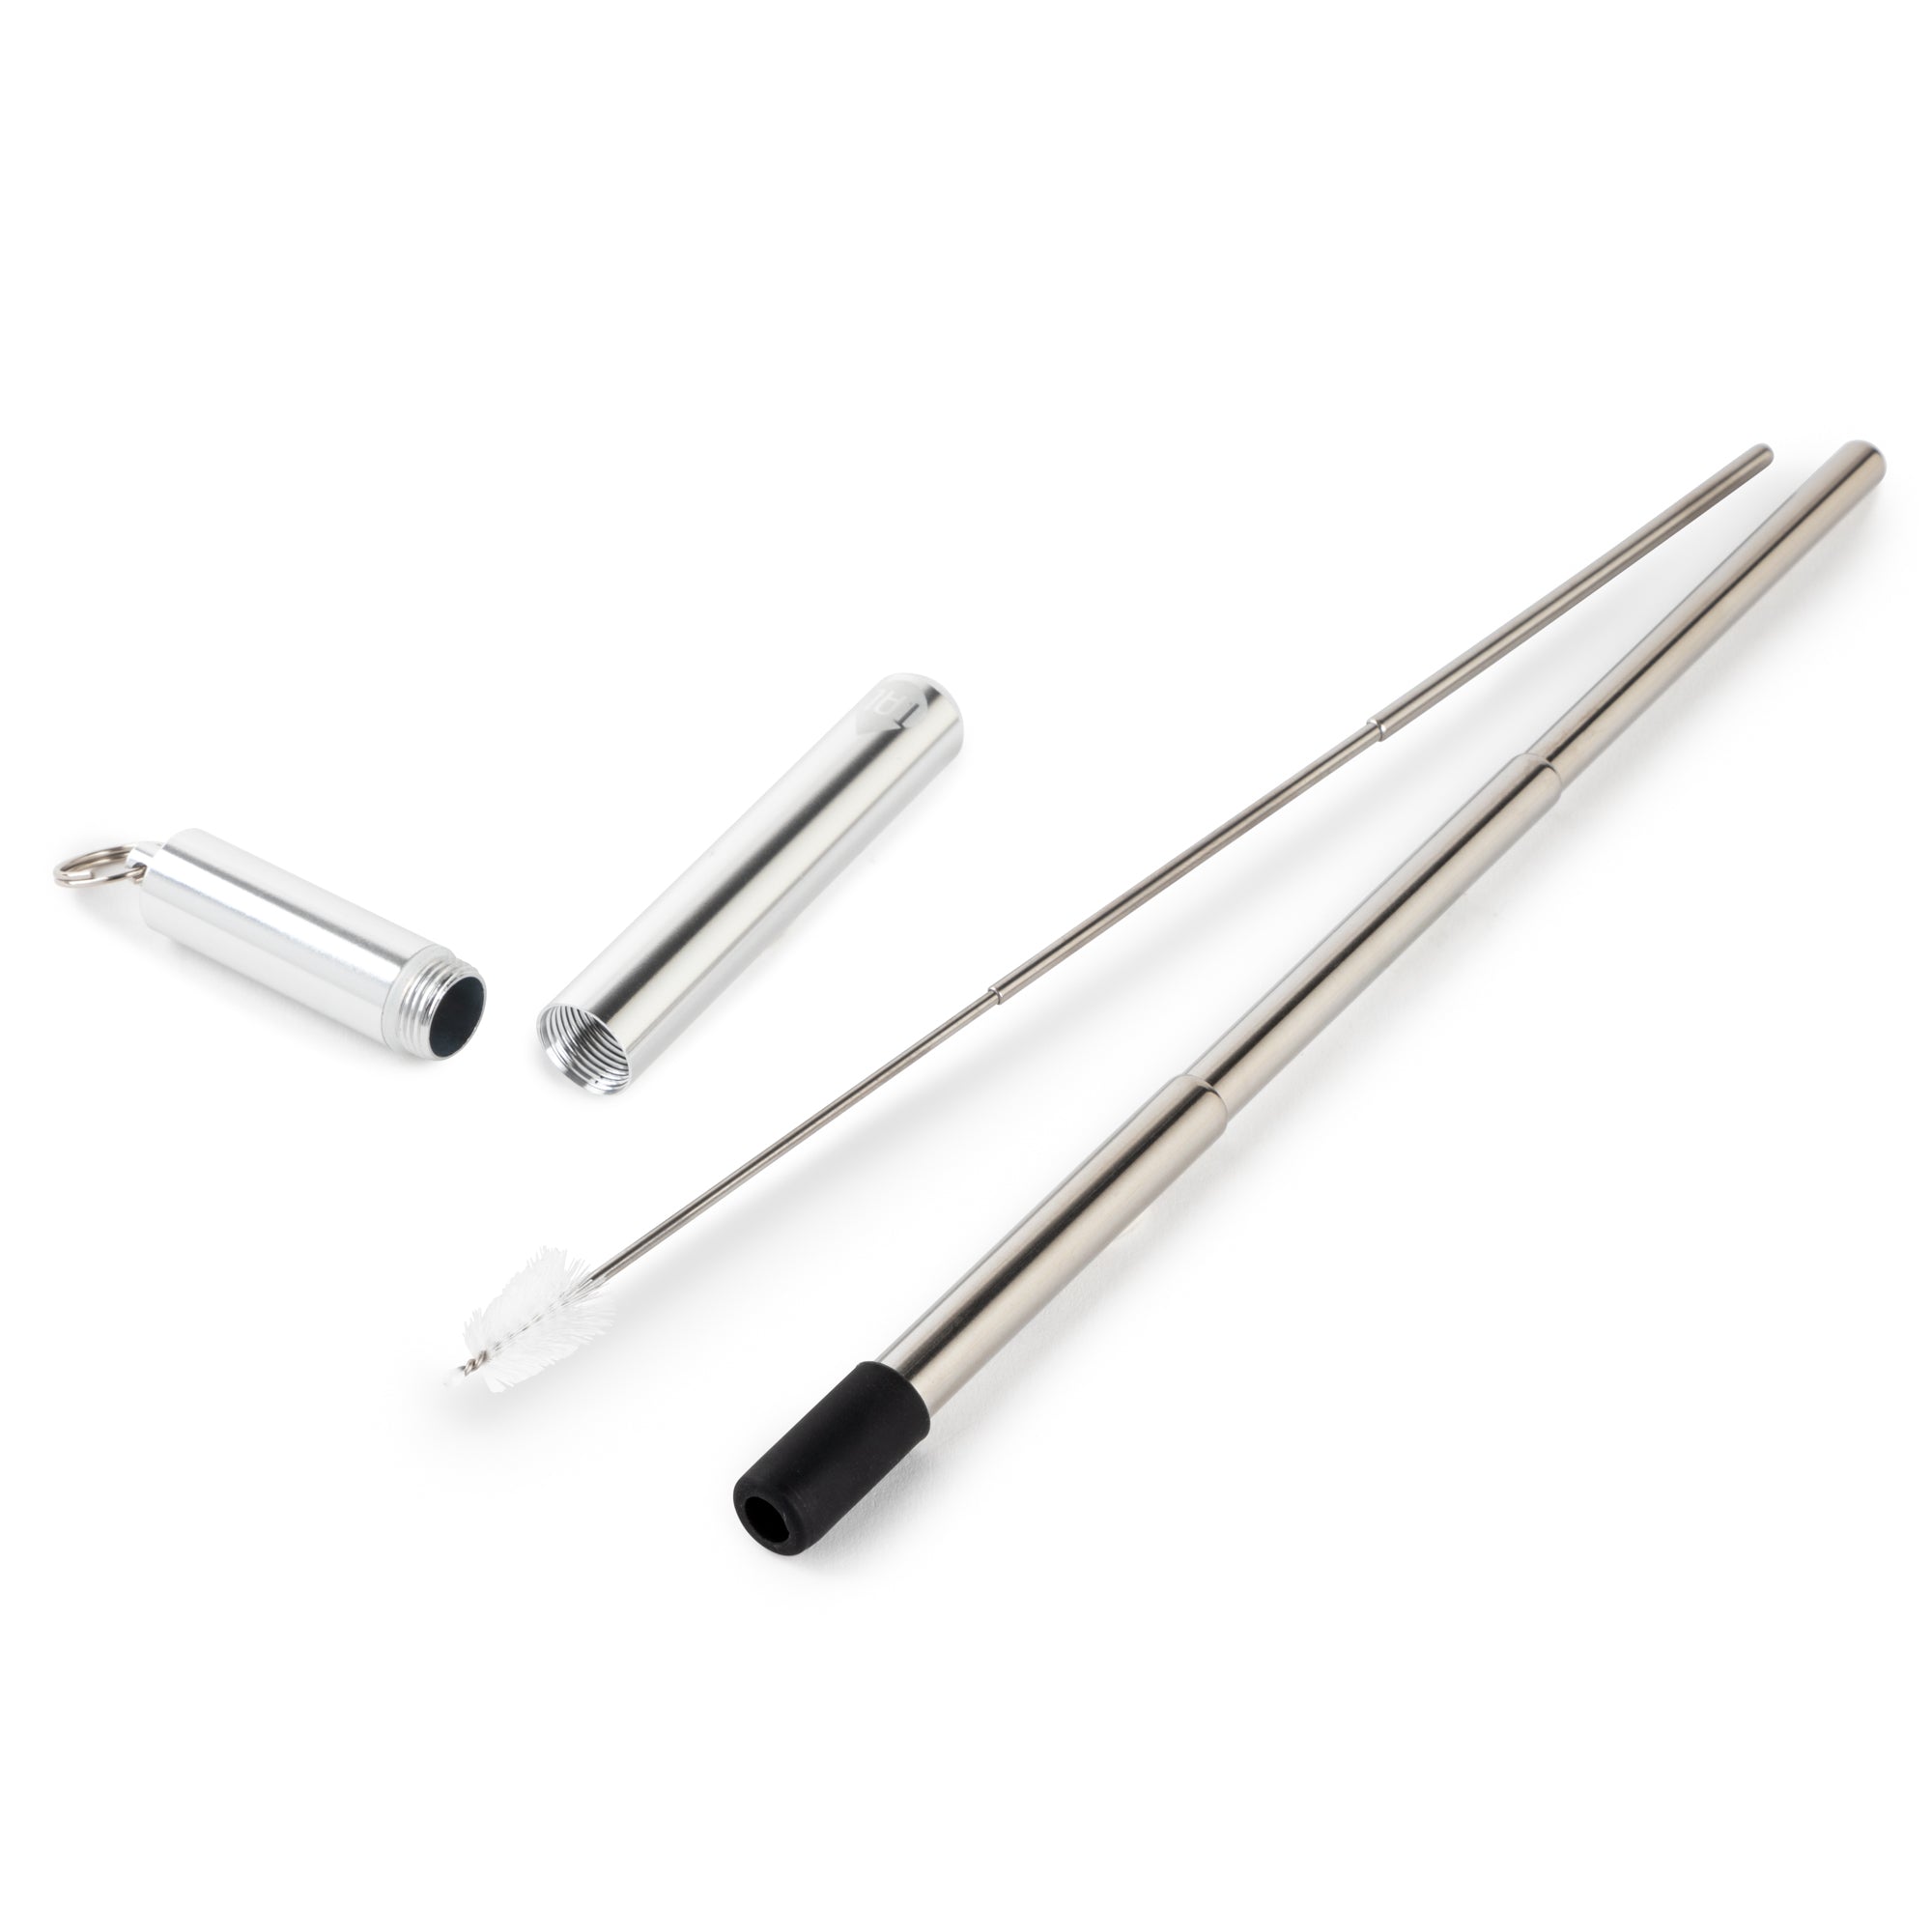 Stainless Steel Straws - COOL HUNTING®